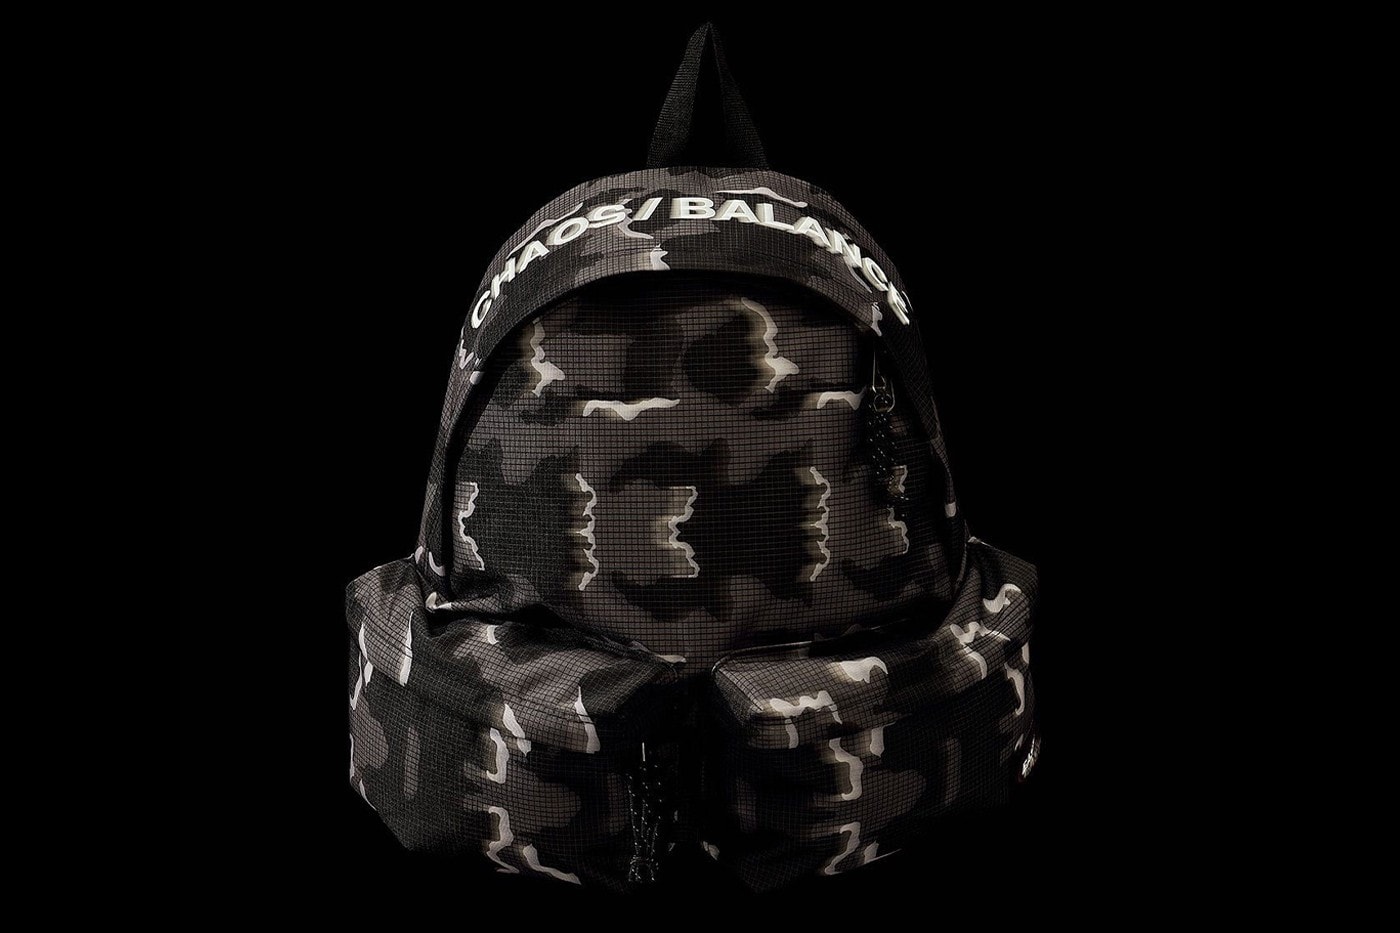 eastpak undercover chaos balance bags collaboration release info